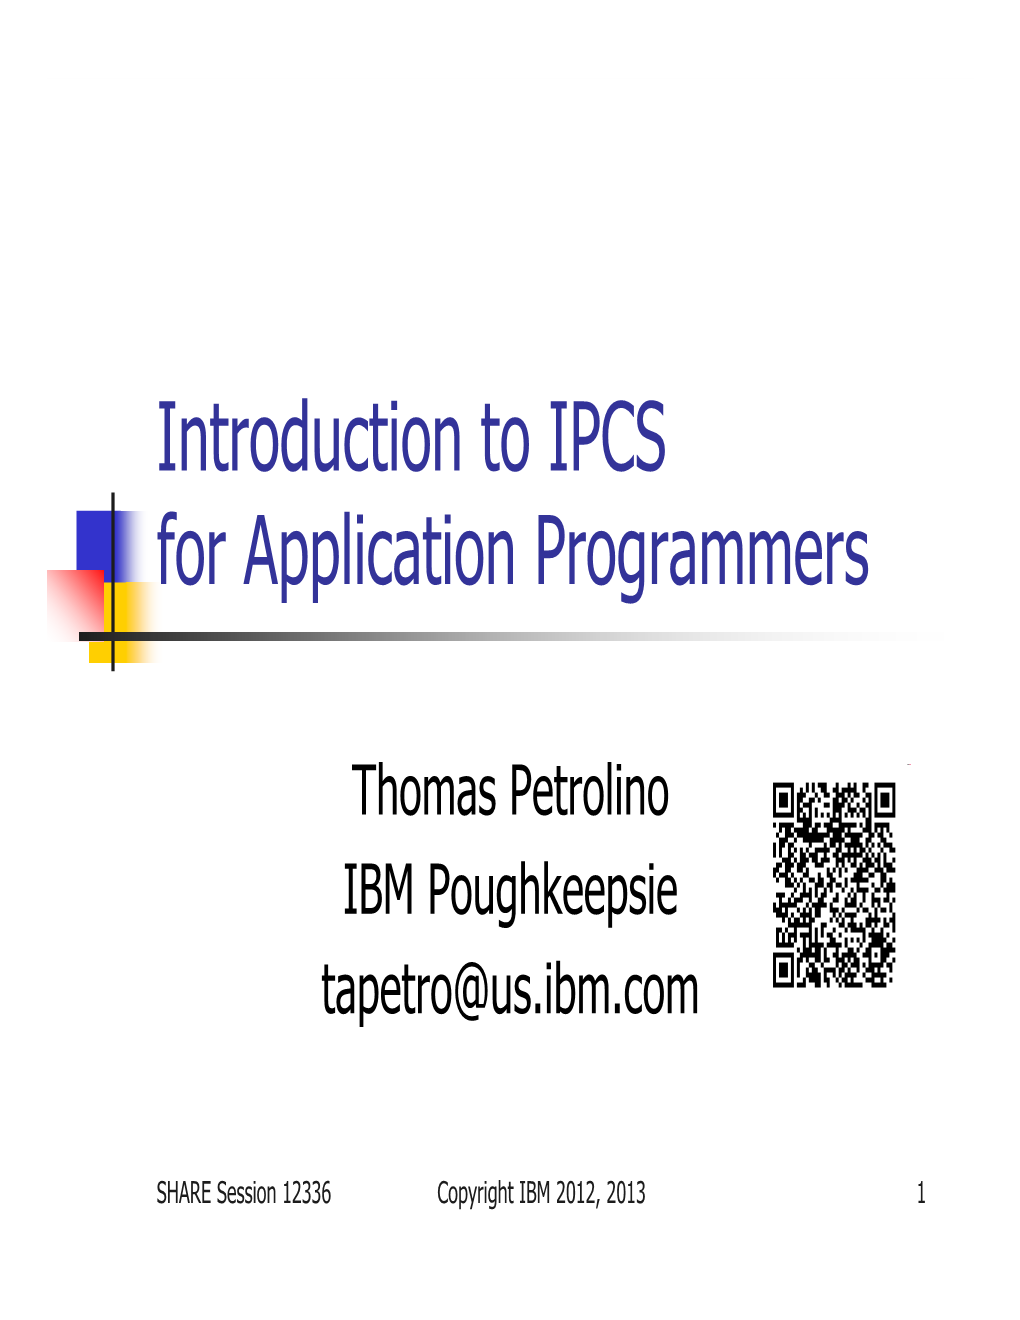 Intro to IPCS for Application Programmers